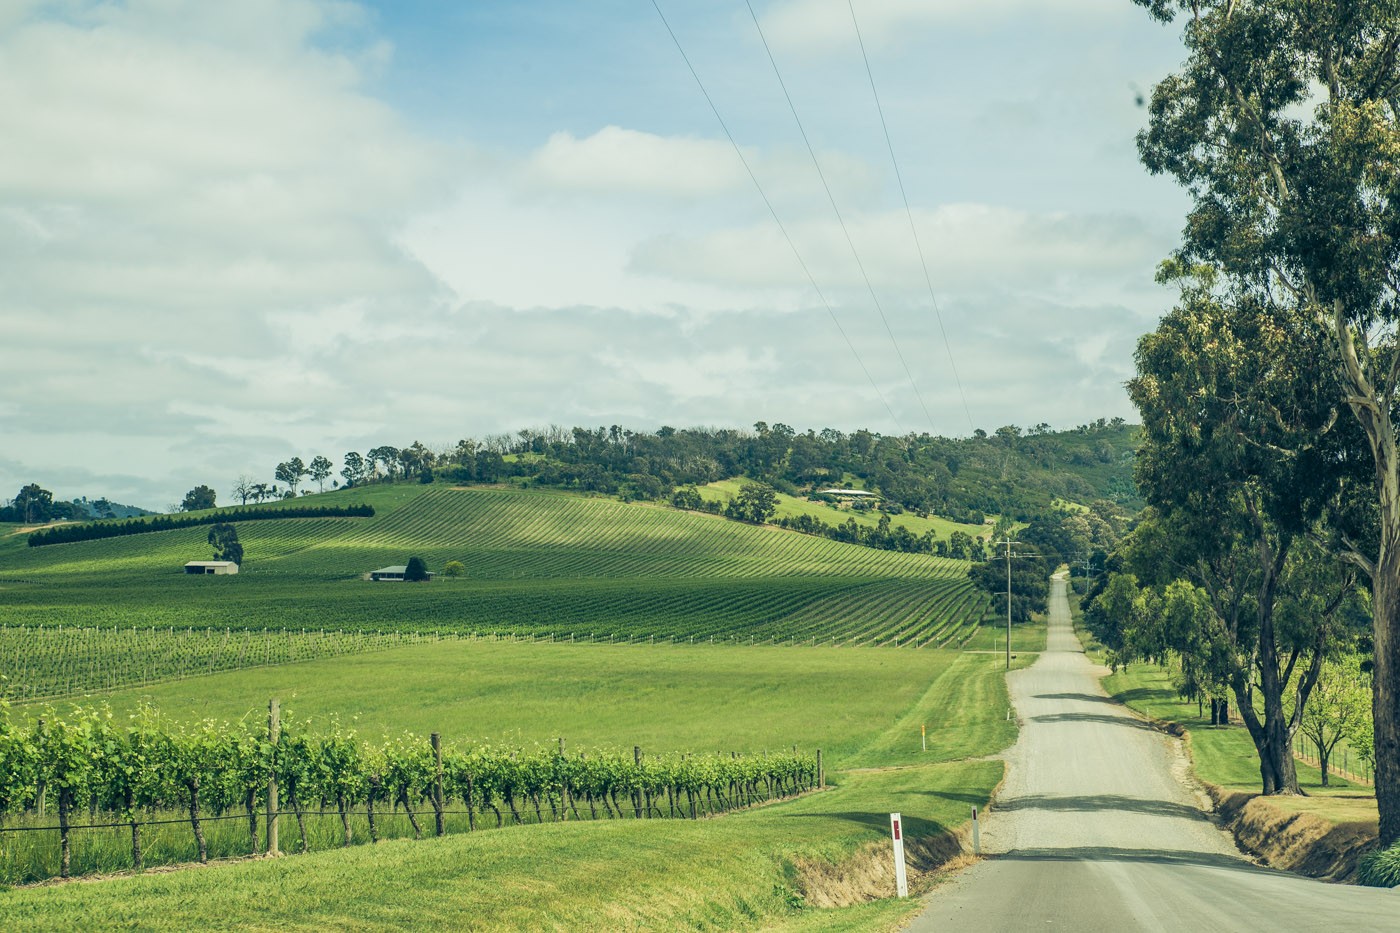 10 Best Things to do in Yarra Valley, Australia